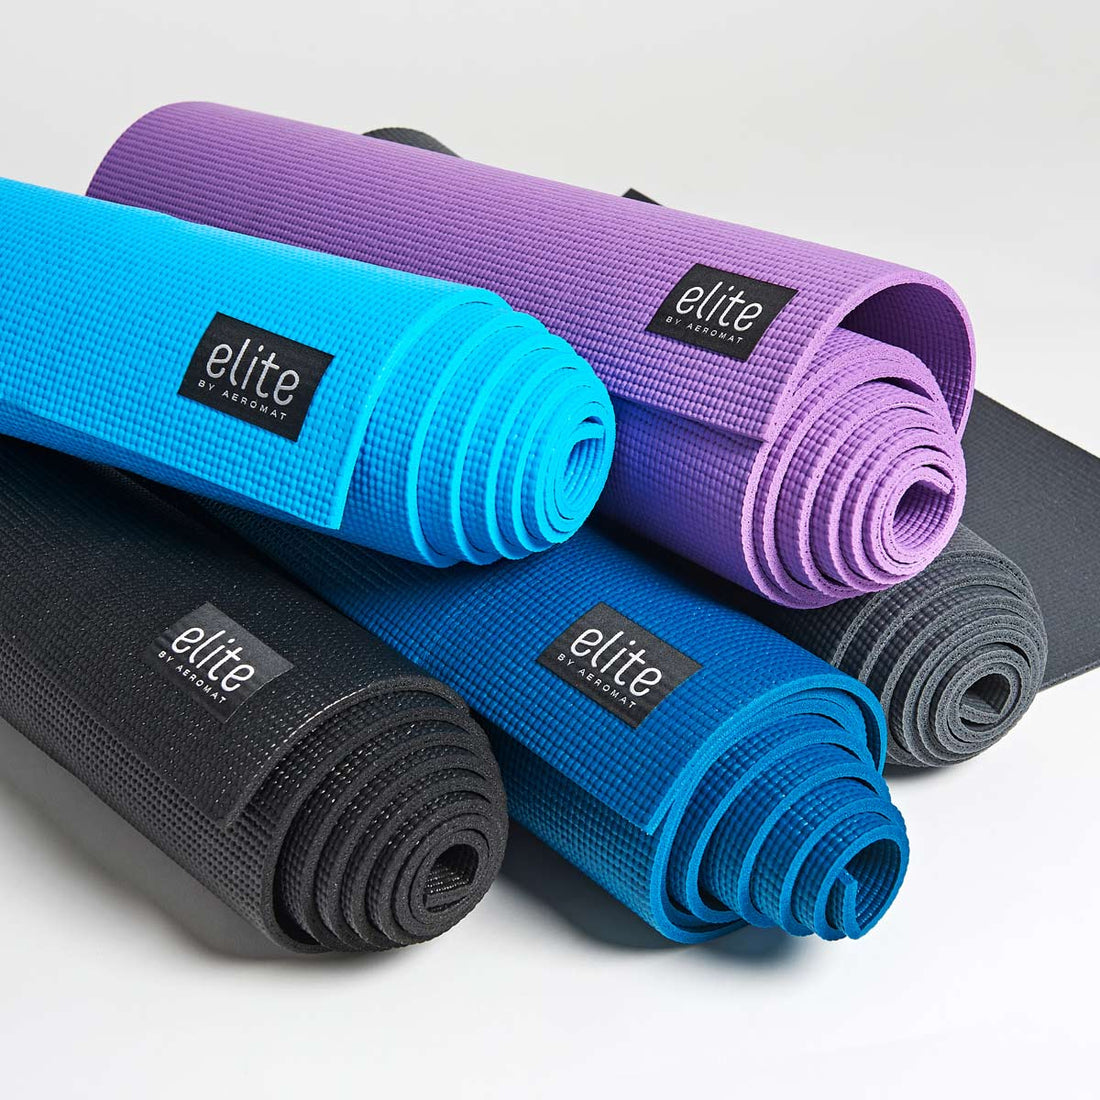 What are closed-cell and open-cell yoga mats? – Aeromat/Ecowise